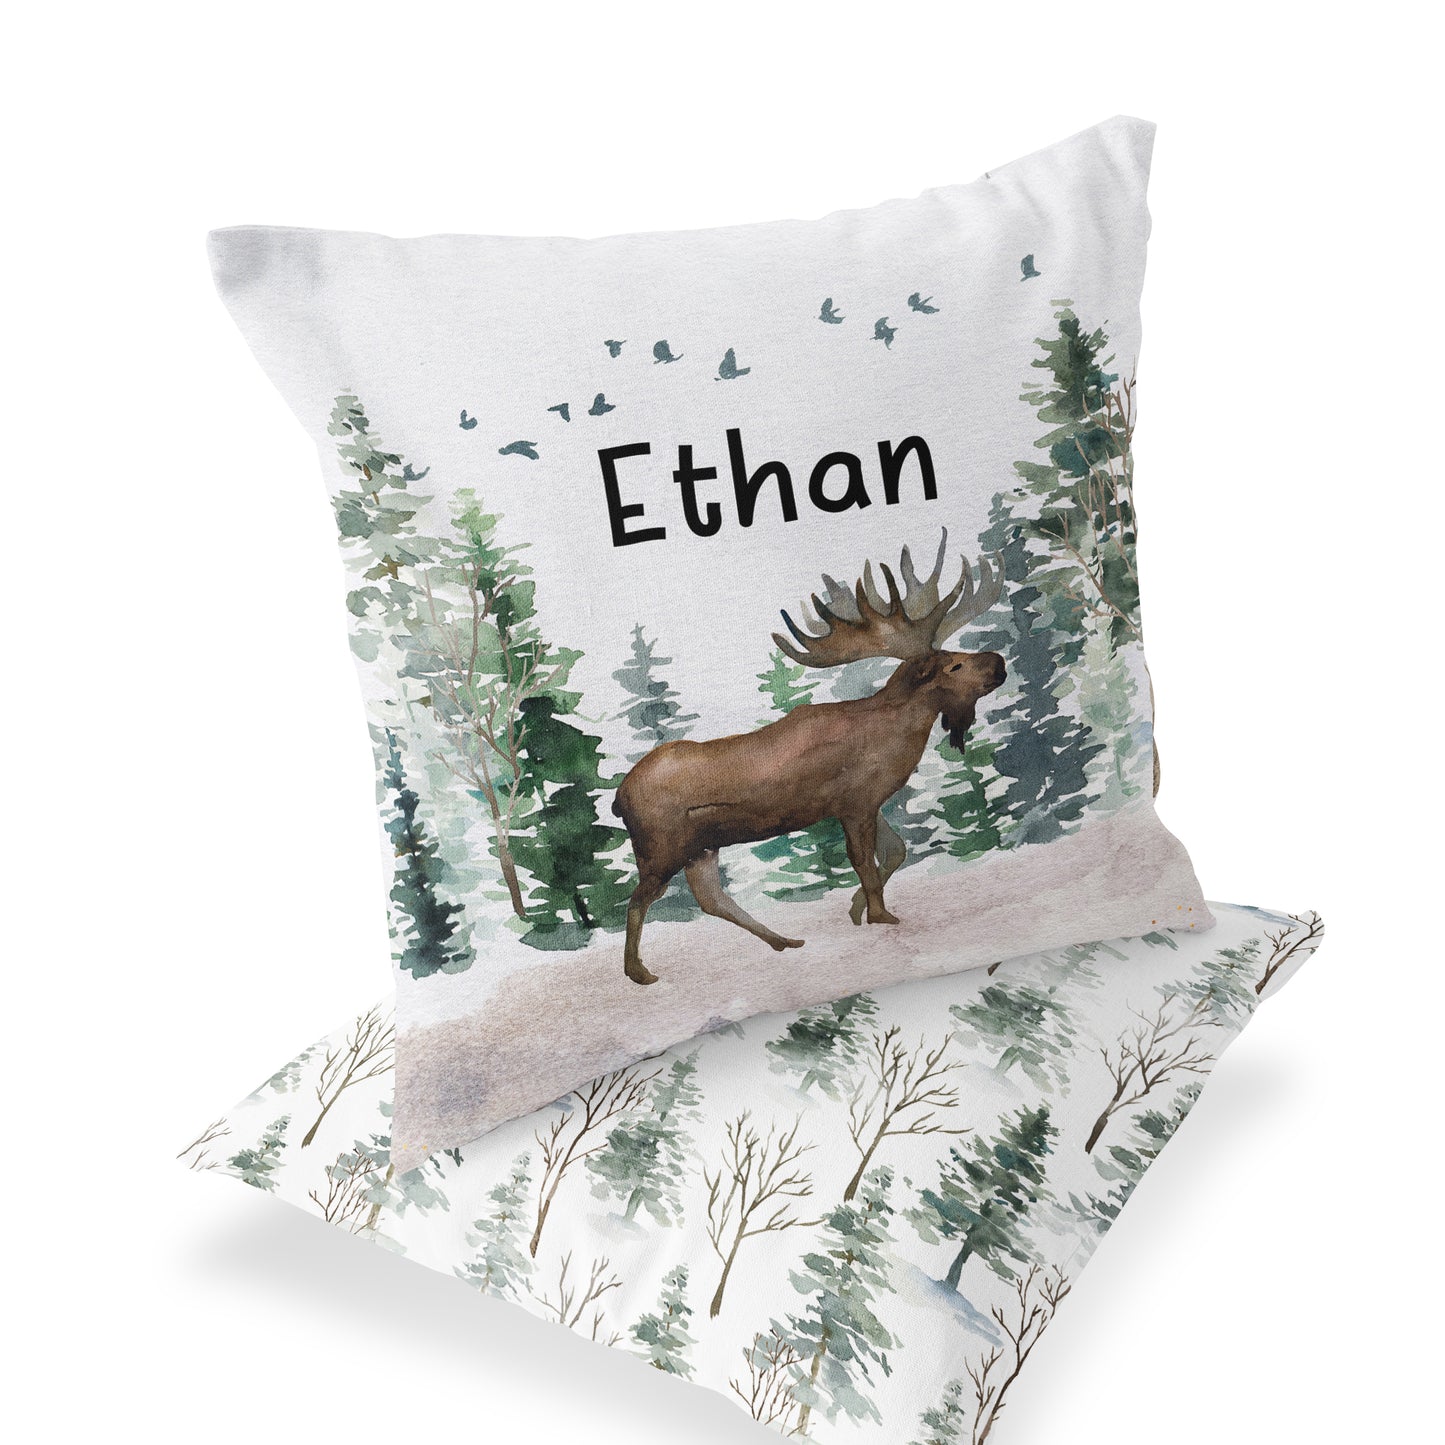 Moose Personalized Pillow, Woodland Nursery Decor - Enchanted Forest